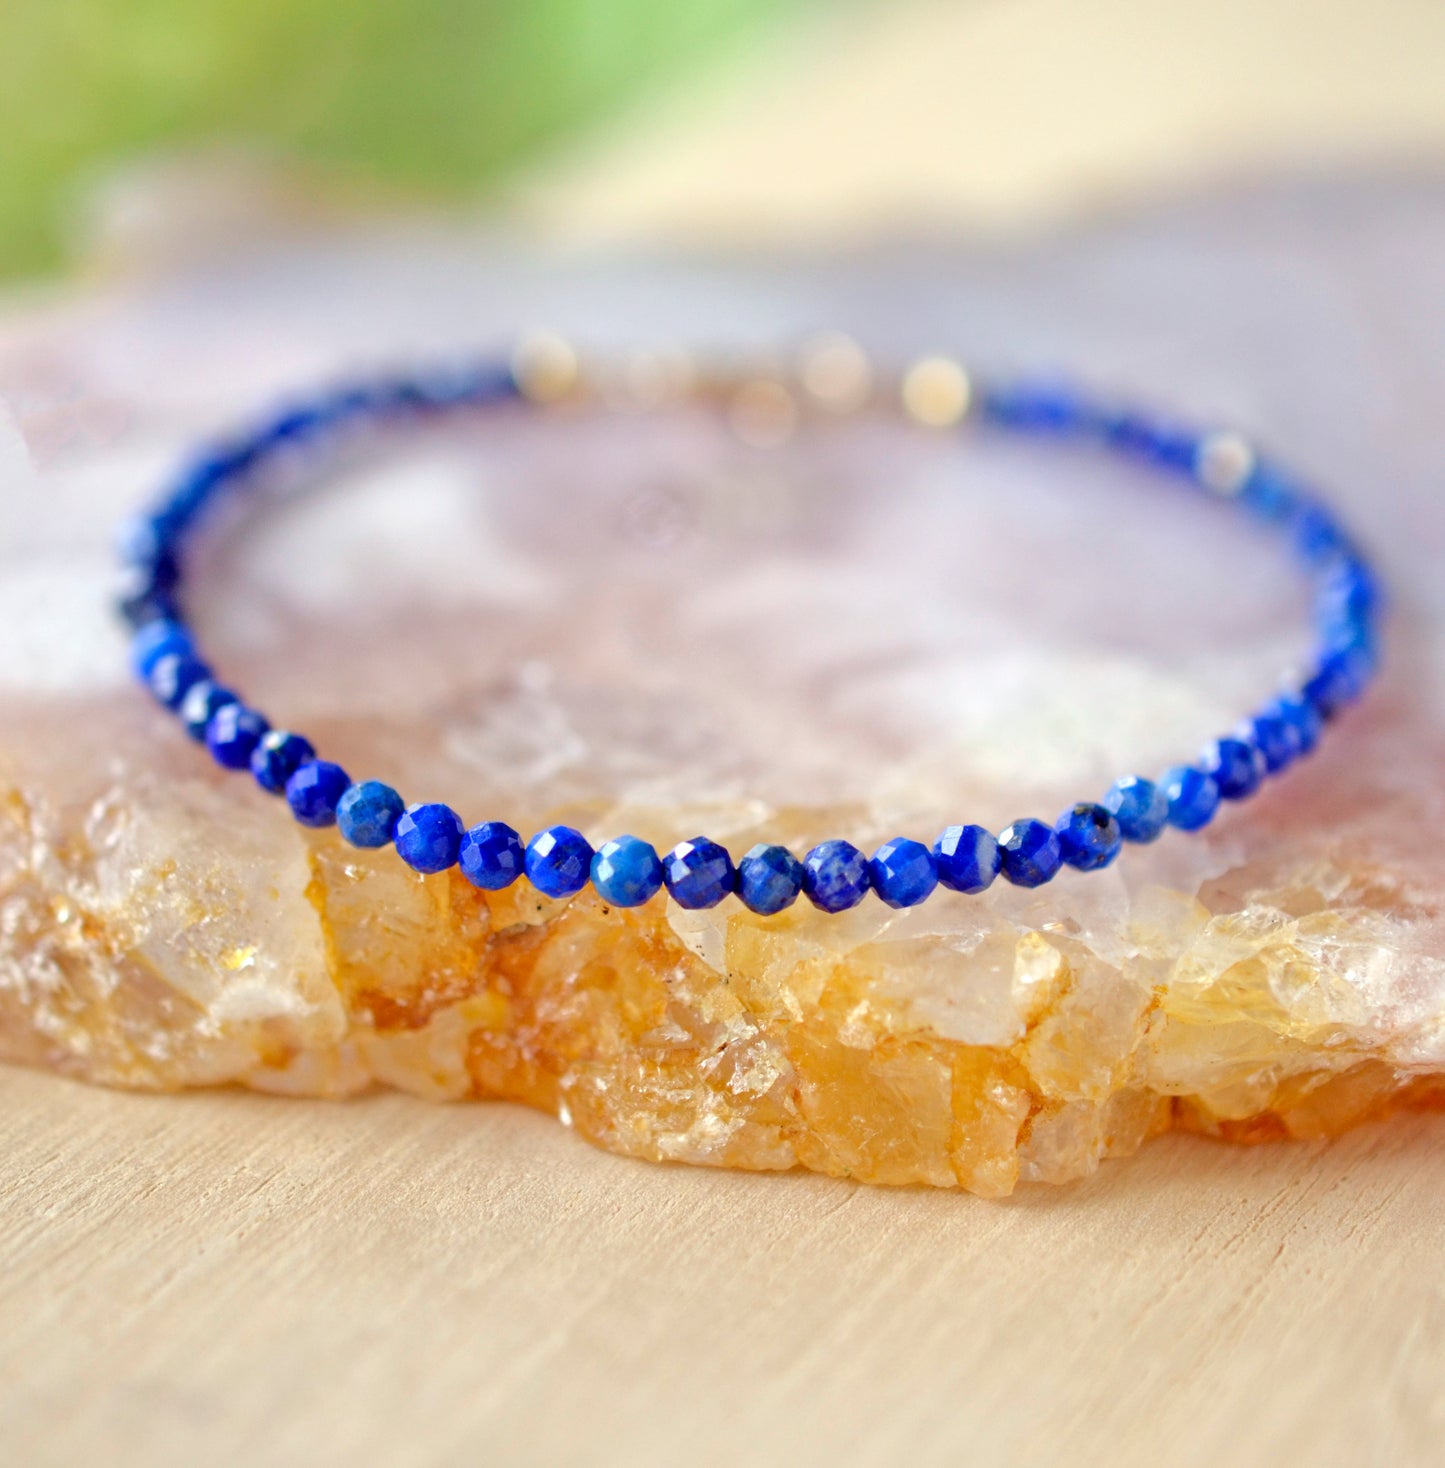 Minimalist Lapis Lazuli bracelet. Handmade with small 3mm natural lapis beads and set onto a sterling silver or 14k gold filled clasp.